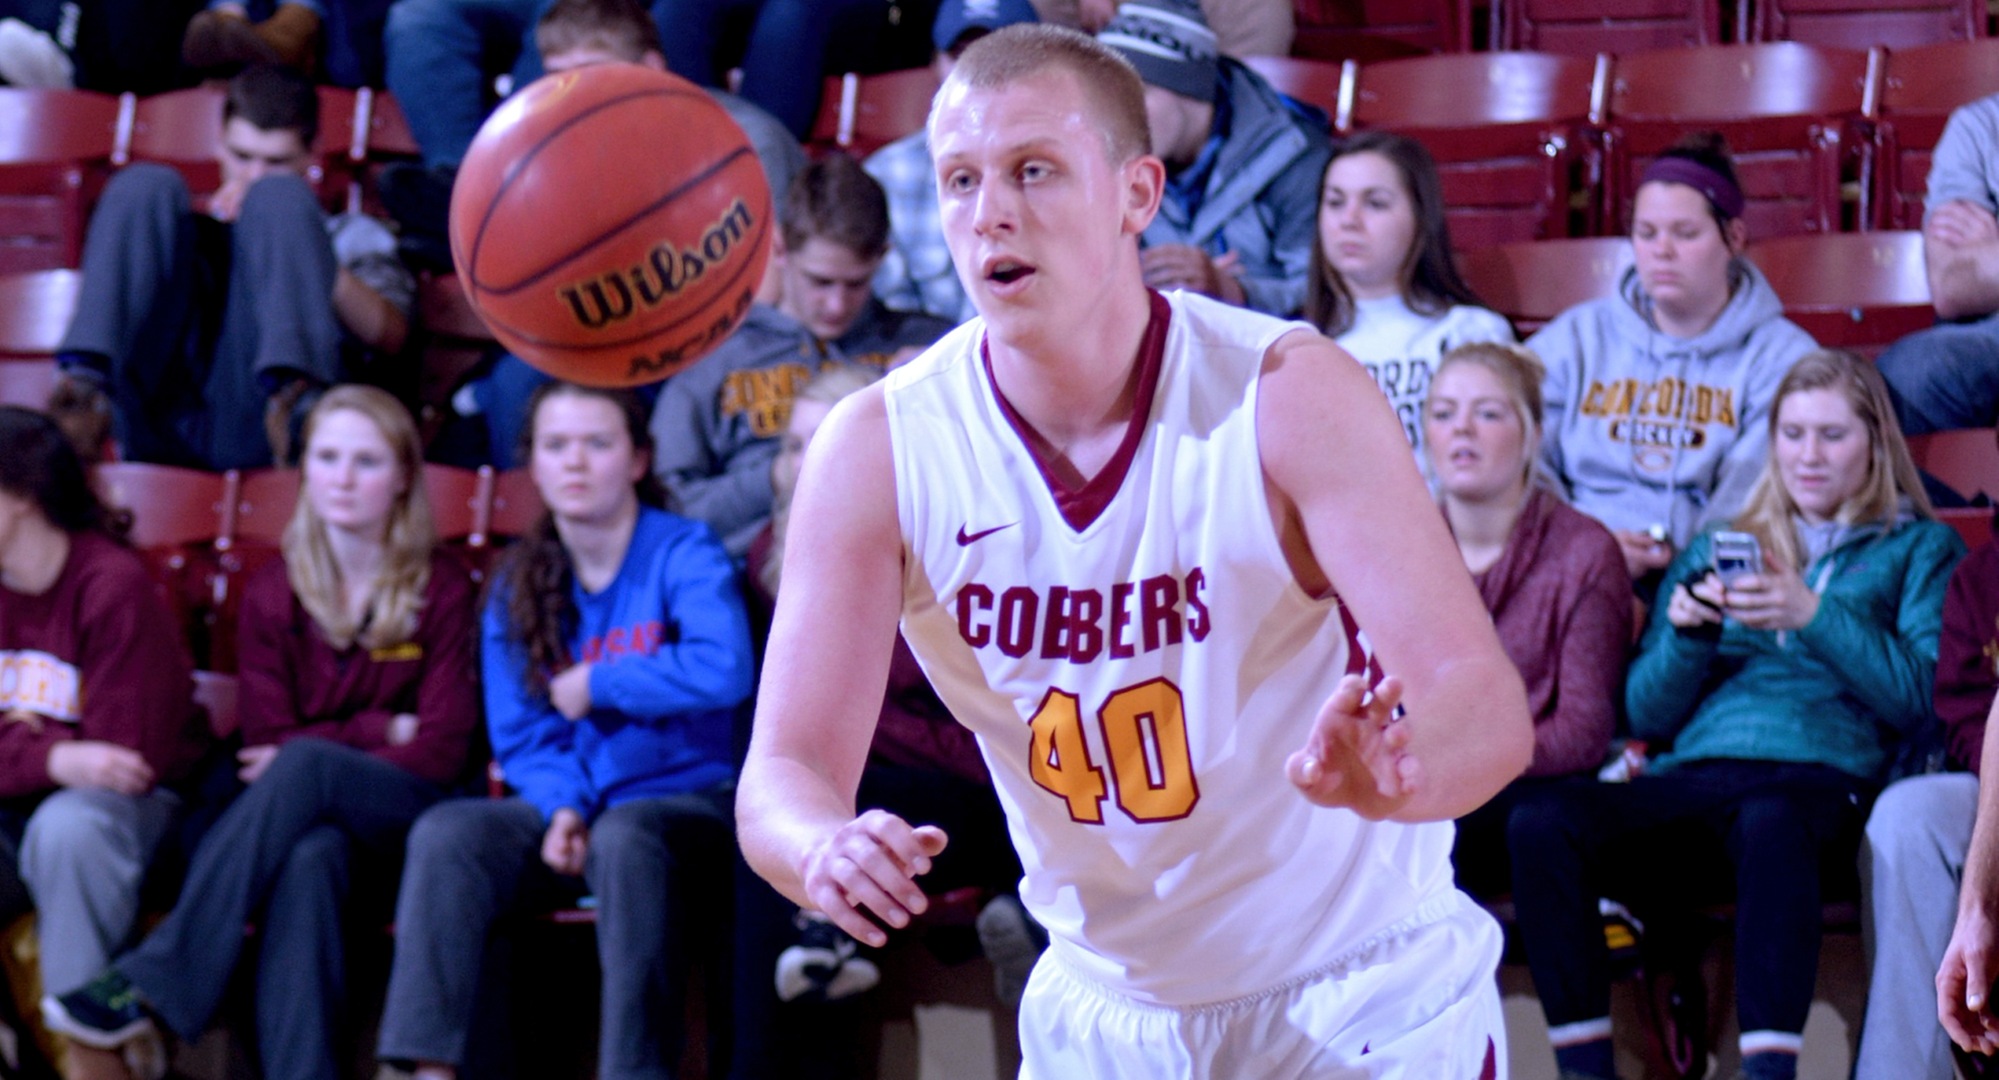 Cobber junior Austin Heins went 8-for-9 from the floor and finished with a game-high 17 points in Concordia's game at Augsburg.